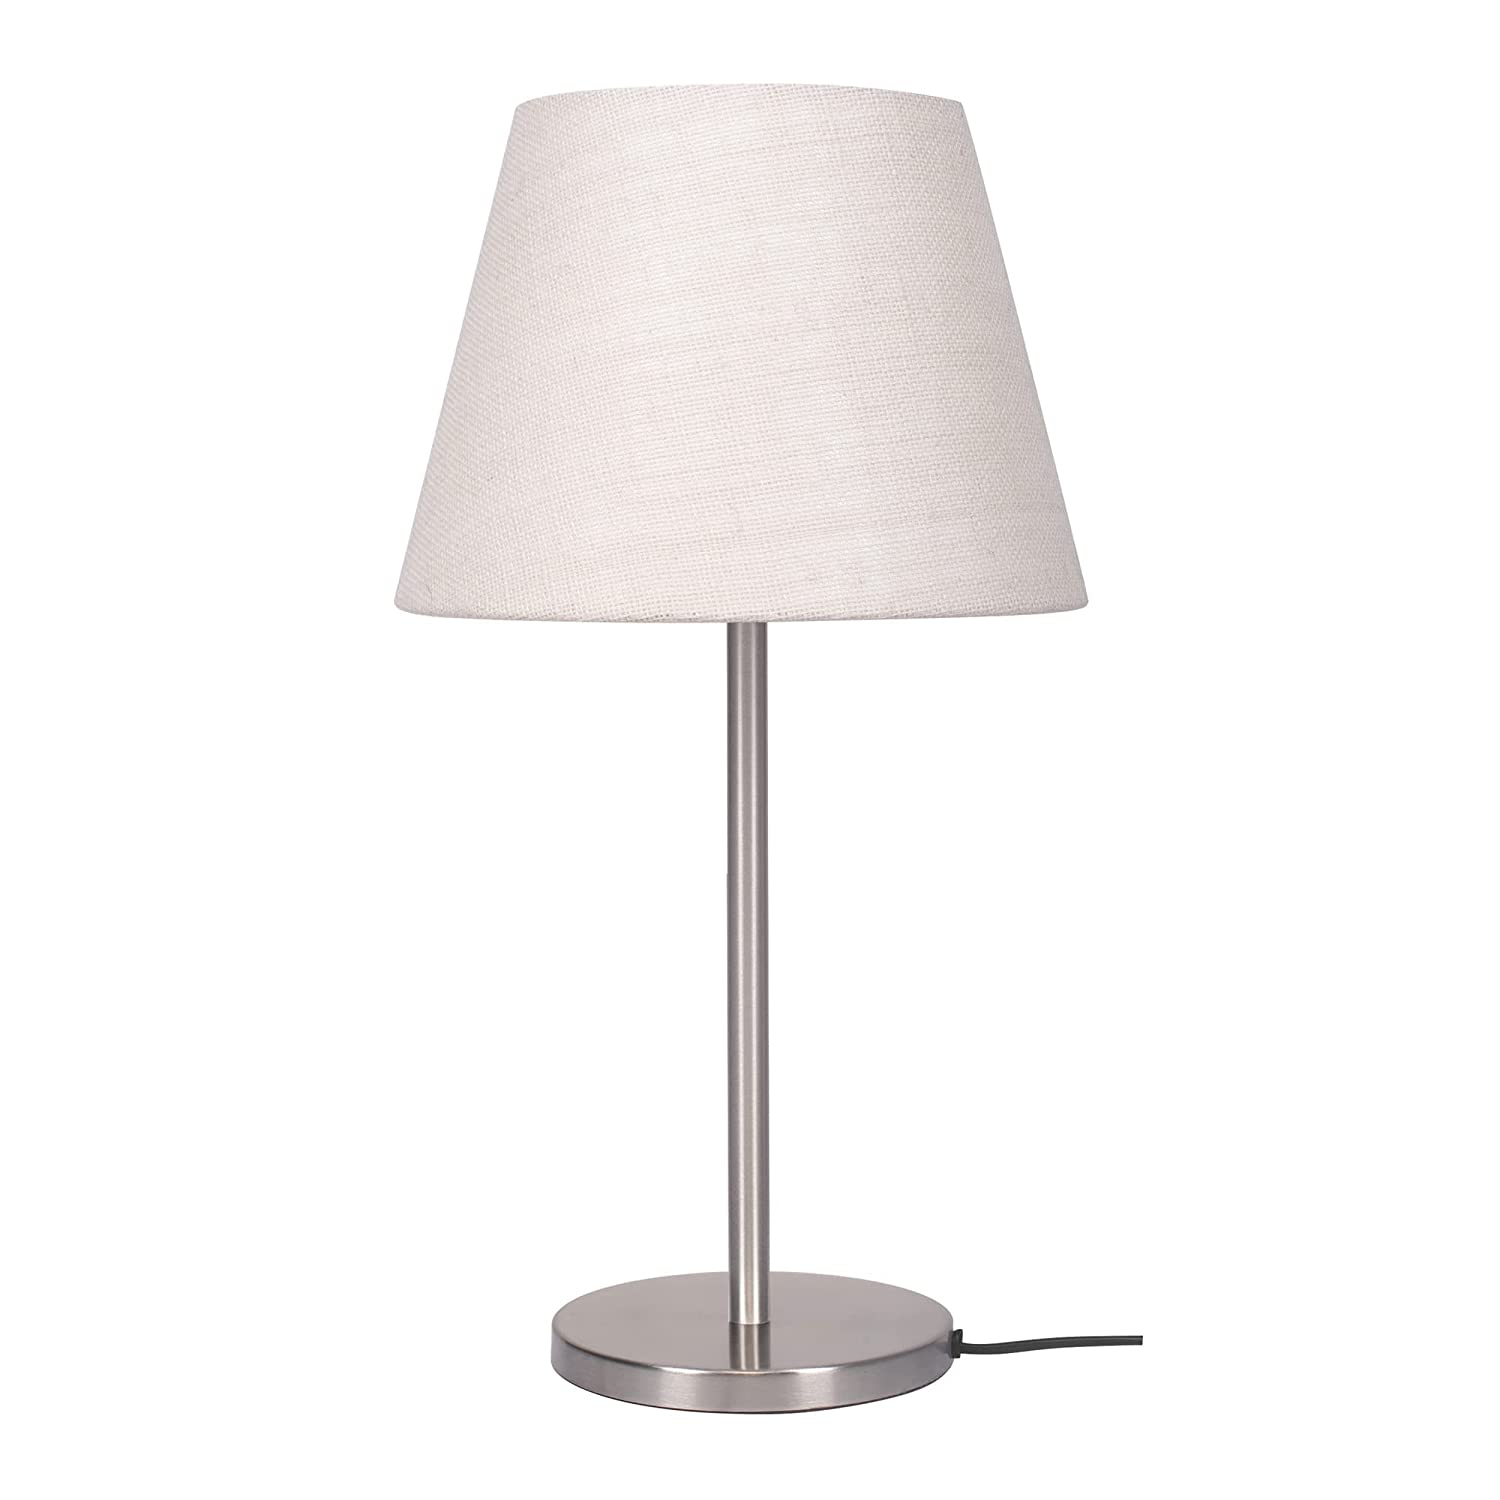 Modern & Sleek Stainless Steel Silver Finish Table Lamp 10 Inches